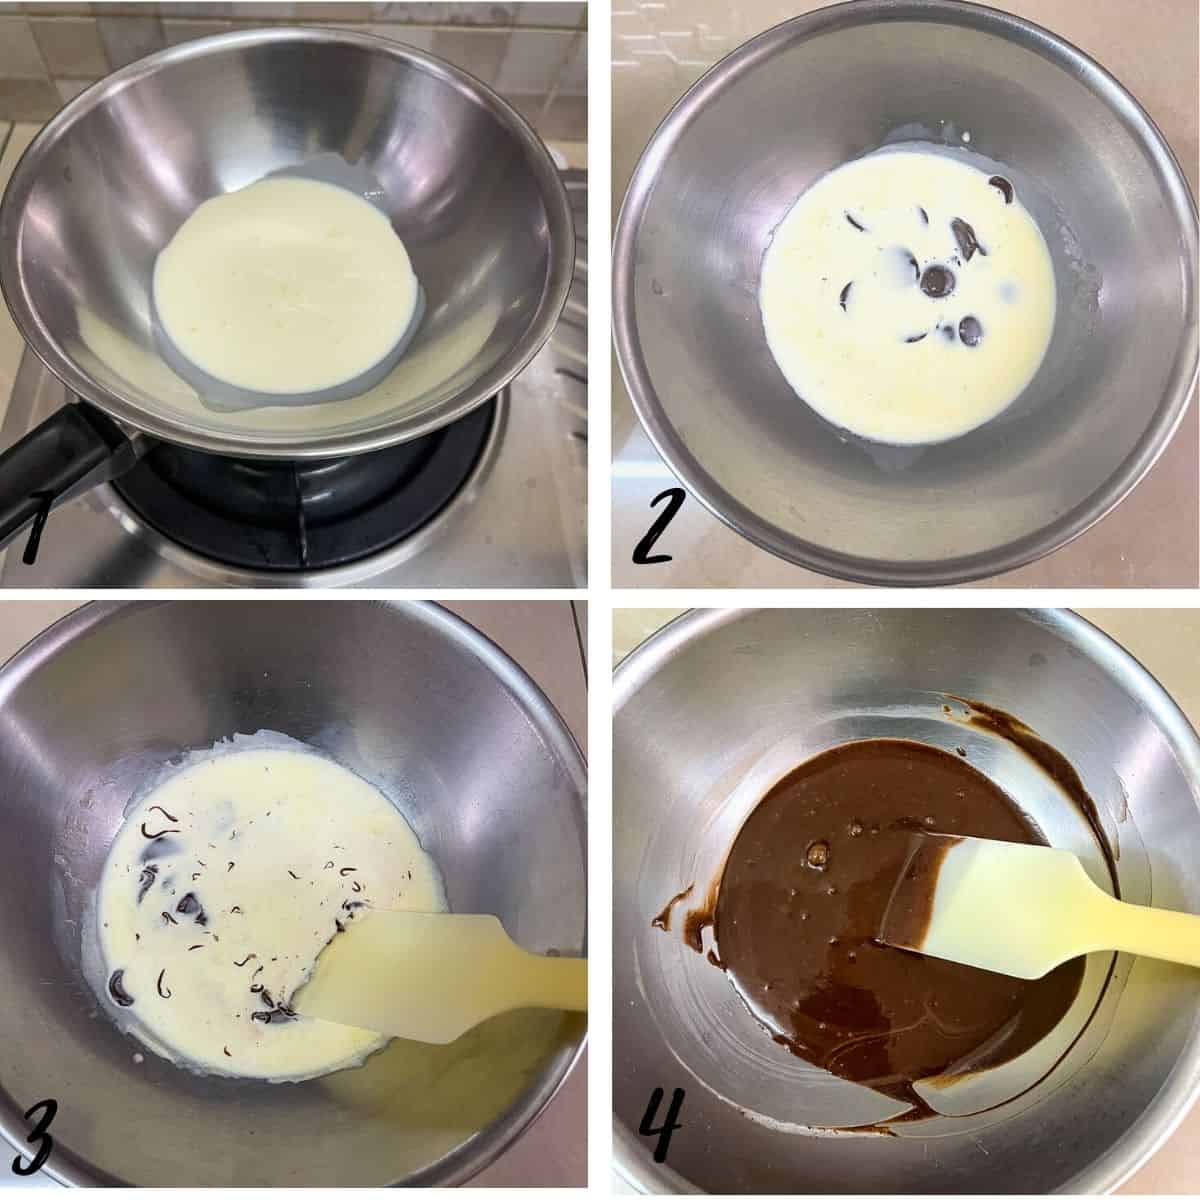 A poster of 4 images showing how to make chocolate ganache topping.